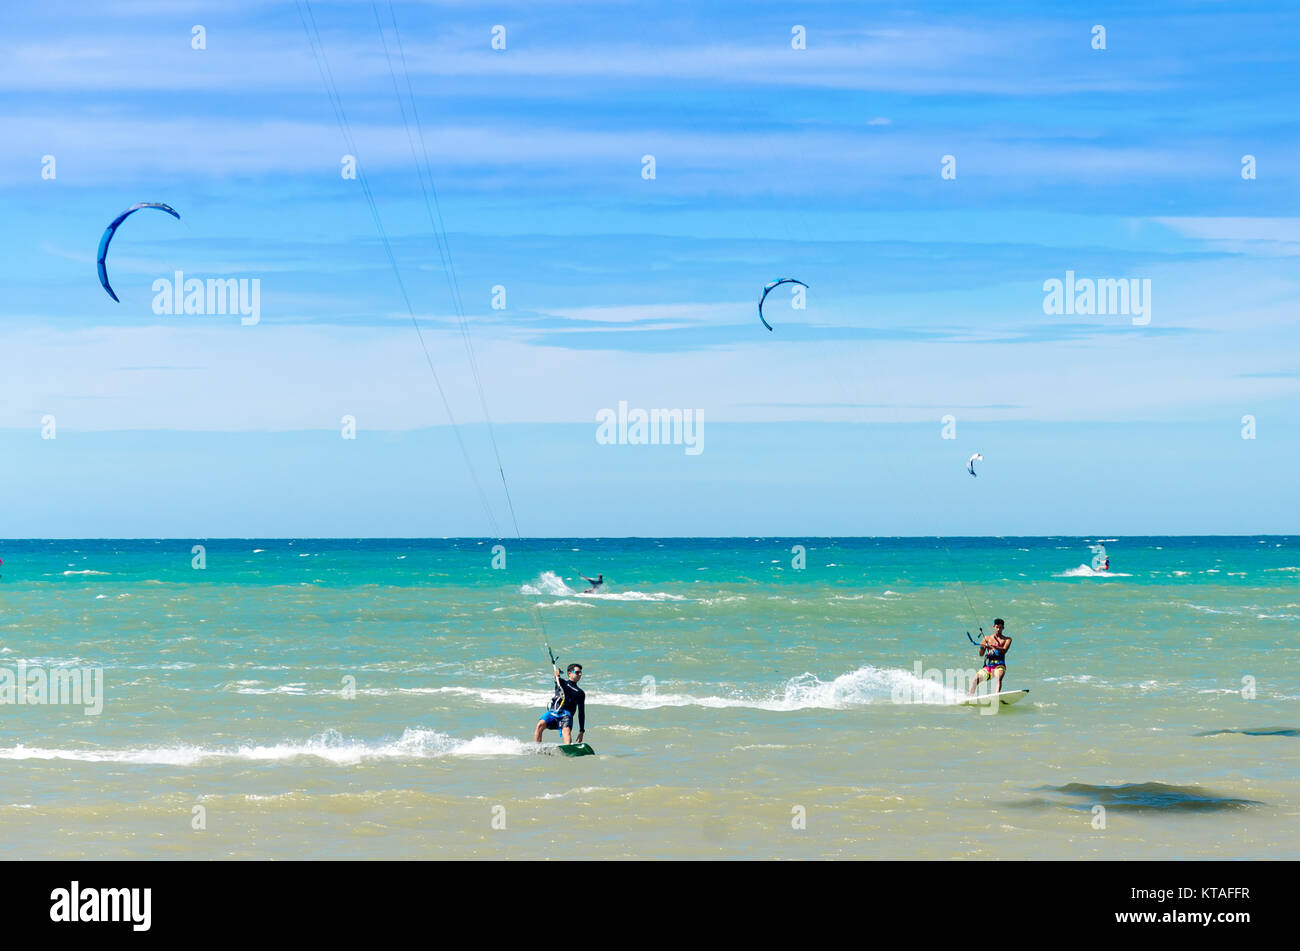 Cumbuco, Brazil, jul 9, 2017: Beach in Cumbuco at the Ceara state with multiple kite surfing sport people Stock Photo